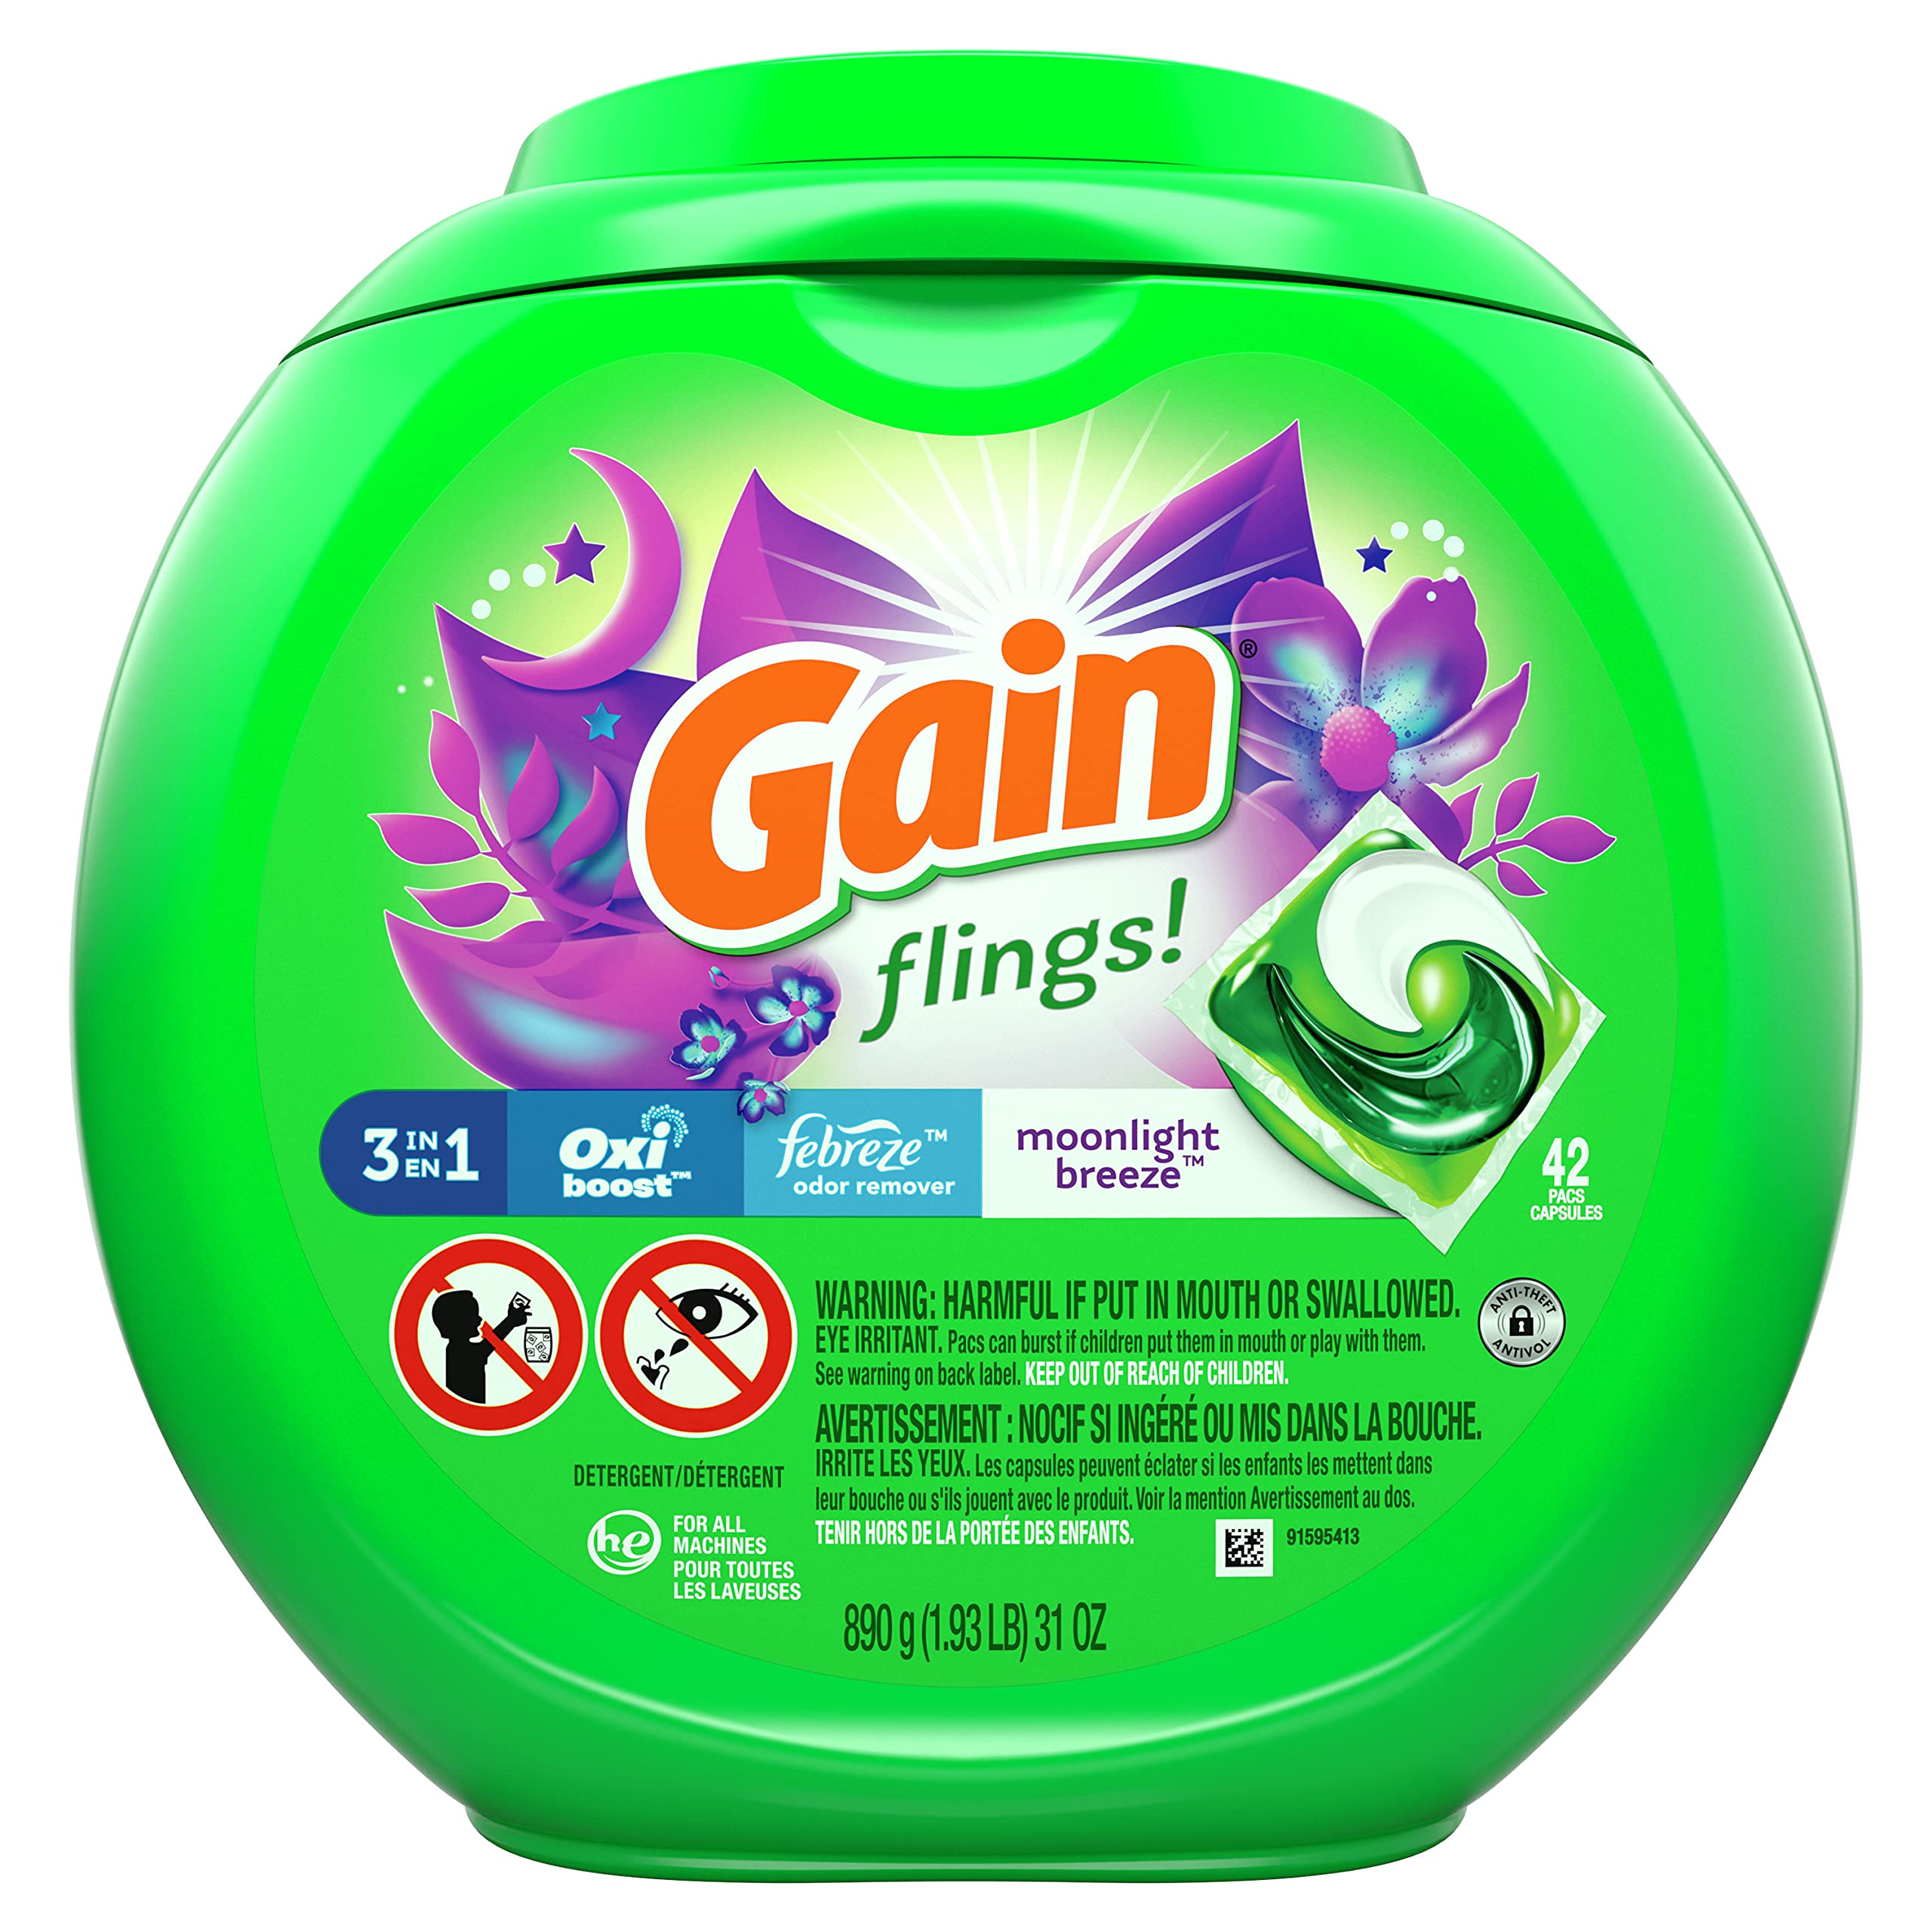 42-Count Gain flings! Liquid Laundry Detergent Pacs (Moonlight Breeze) $12.99 + $6.50 Amazon Credit + Free Shipping w/ Prime or on $35+